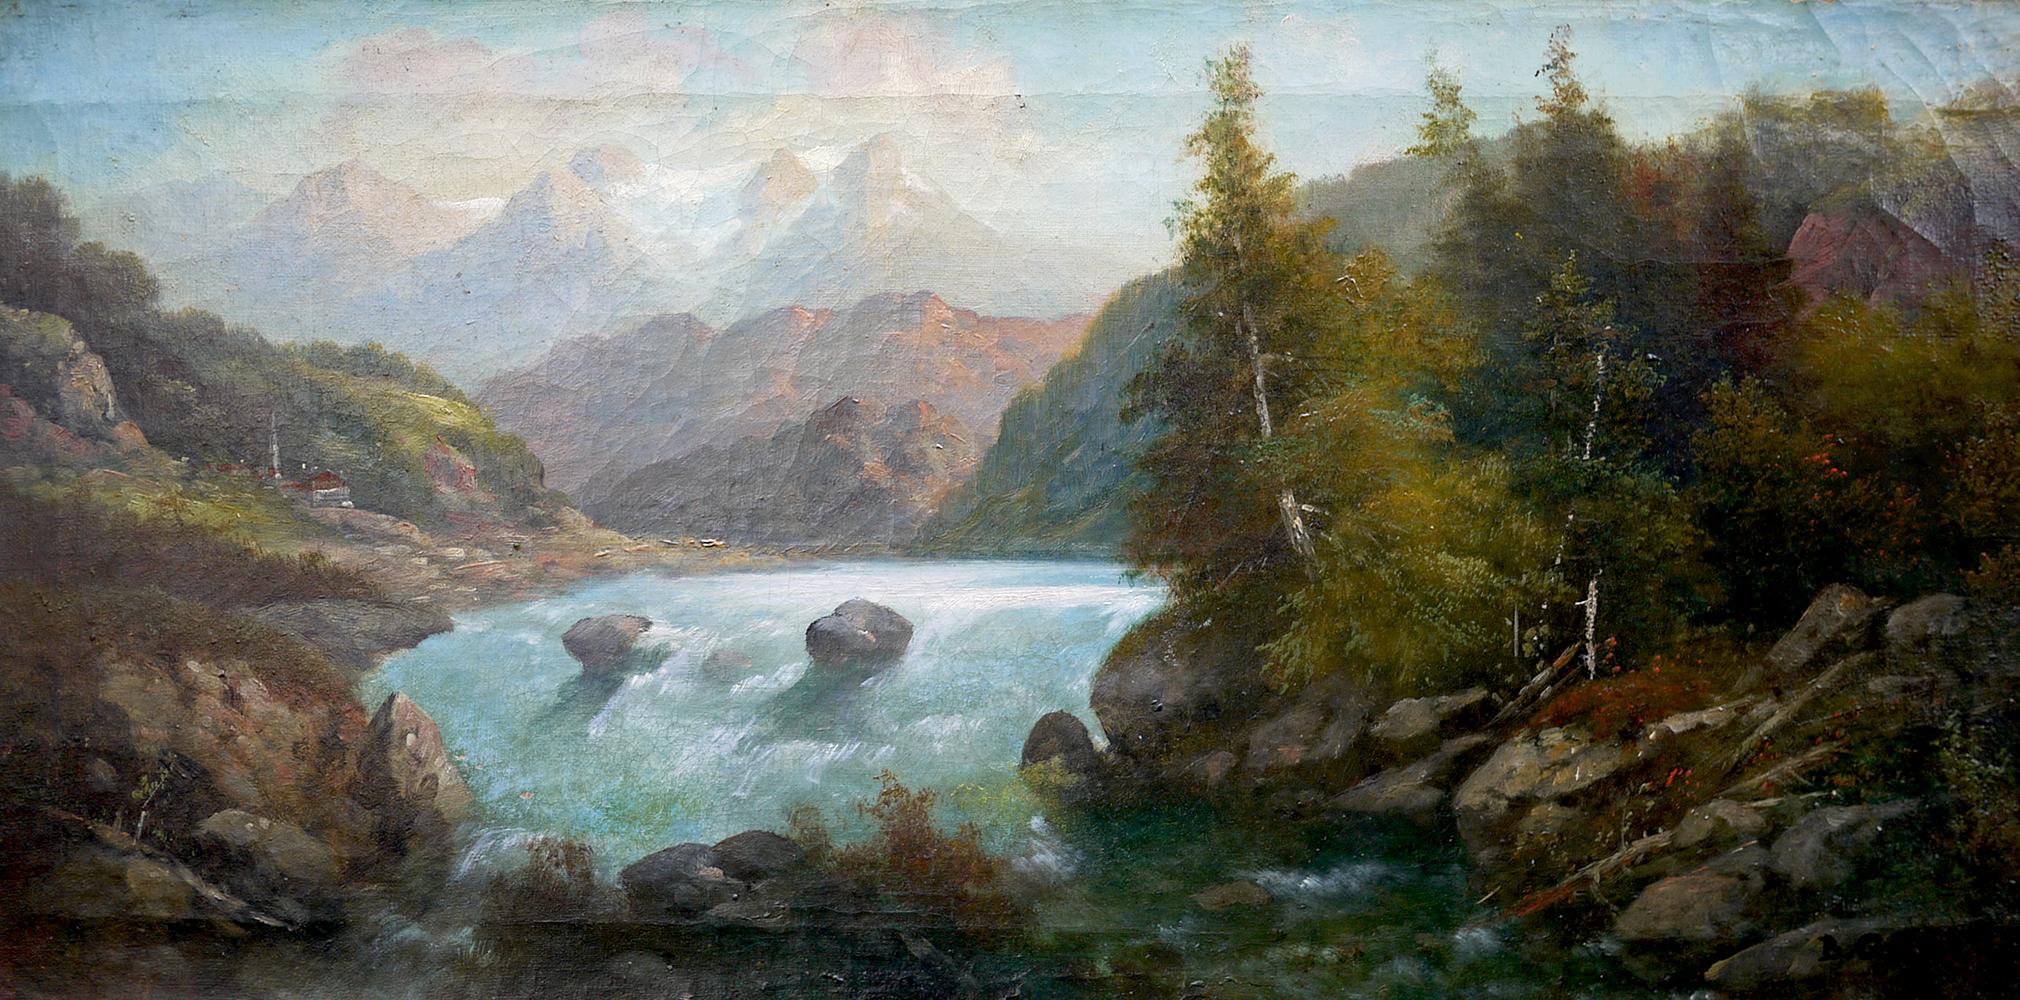 Alpine landscape, B. Gresse, second half of the 19th century.

Oil on canvas.

Measures: 31 cm x 63 cm (dimensions referring to the canvas only - 45 cm x 76 cm with black frame - the painting is sold with frame).

Available with the original